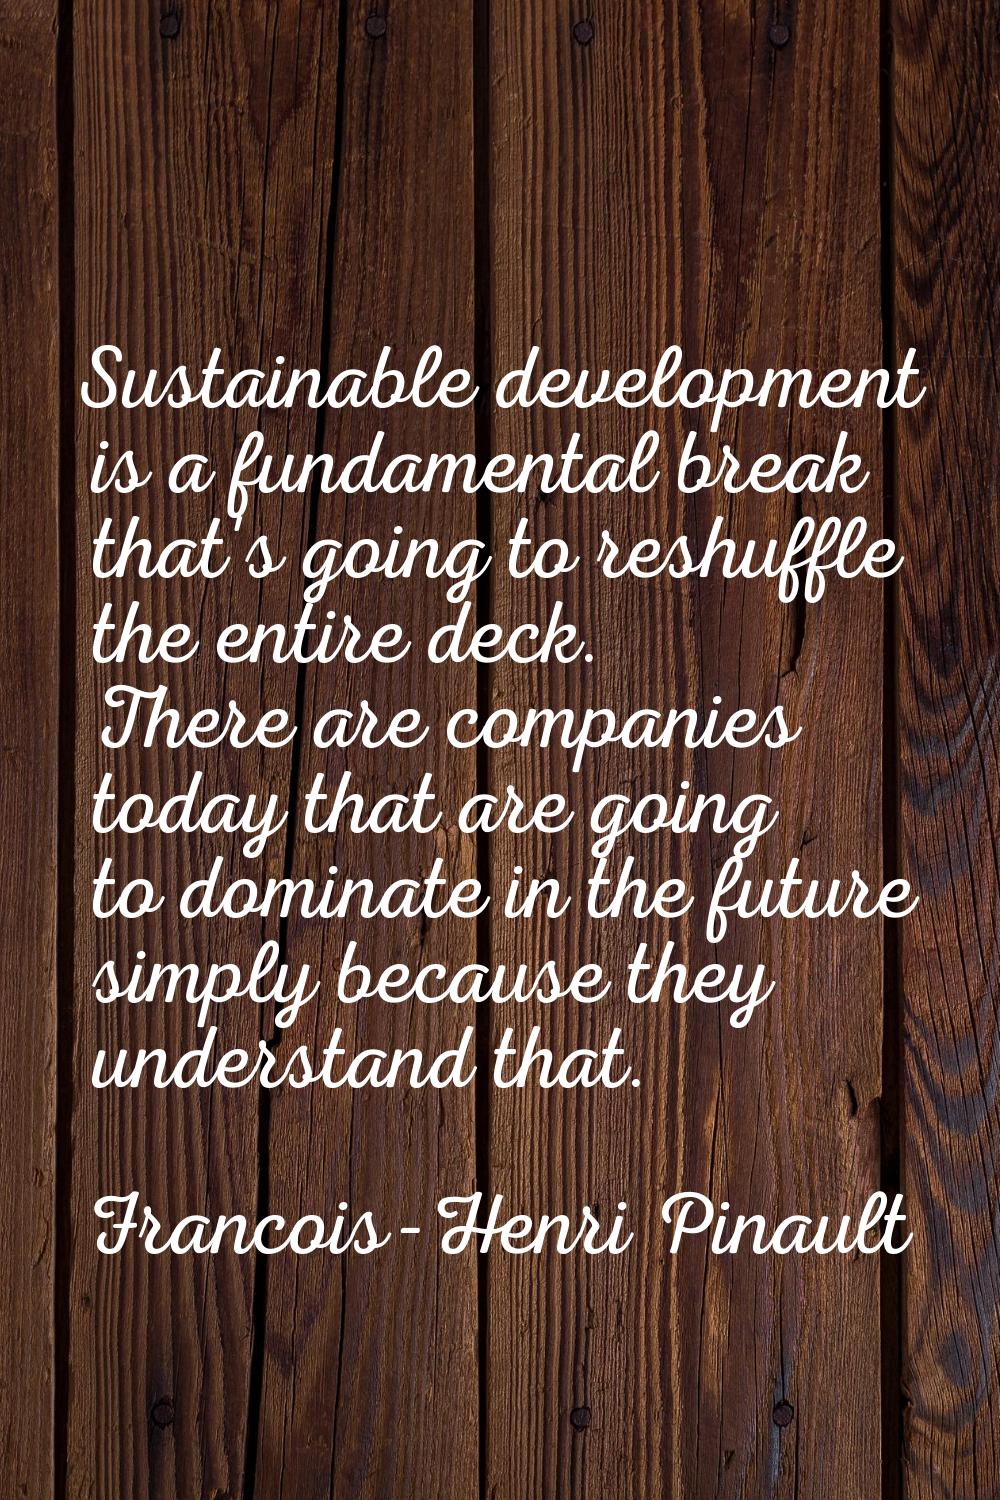 Sustainable development is a fundamental break that's going to reshuffle the entire deck. There are